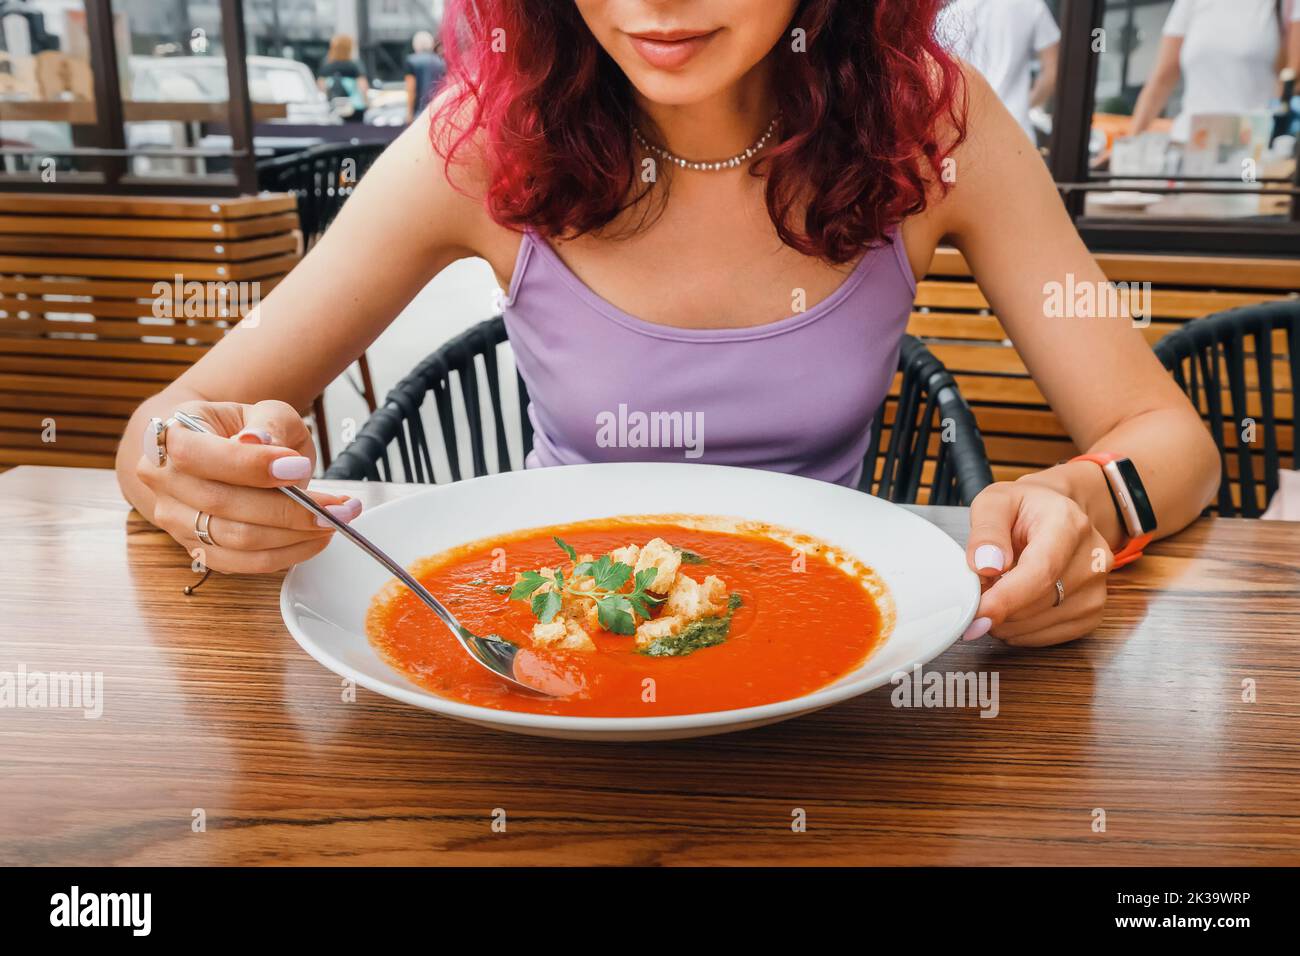 Woman eating delicious tomato soup in cafe or restaurant. Vegetarian cuisine and healthy vegetable diet. Dinner and meal with organic products Stock Photo